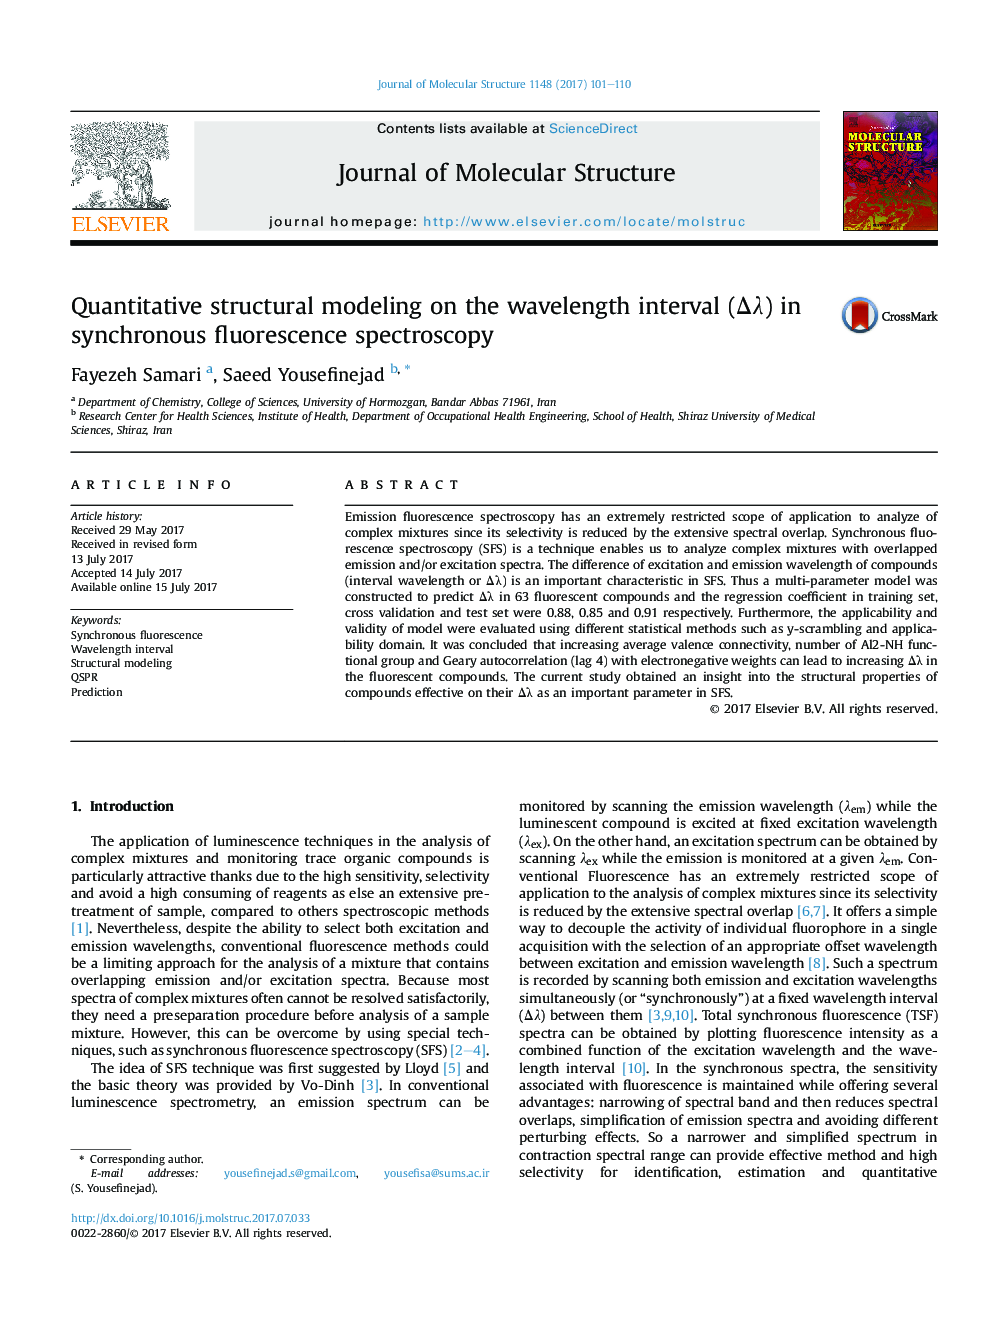 Quantitative structural modeling on the wavelength interval (ÎÎ») in synchronous fluorescence spectroscopy